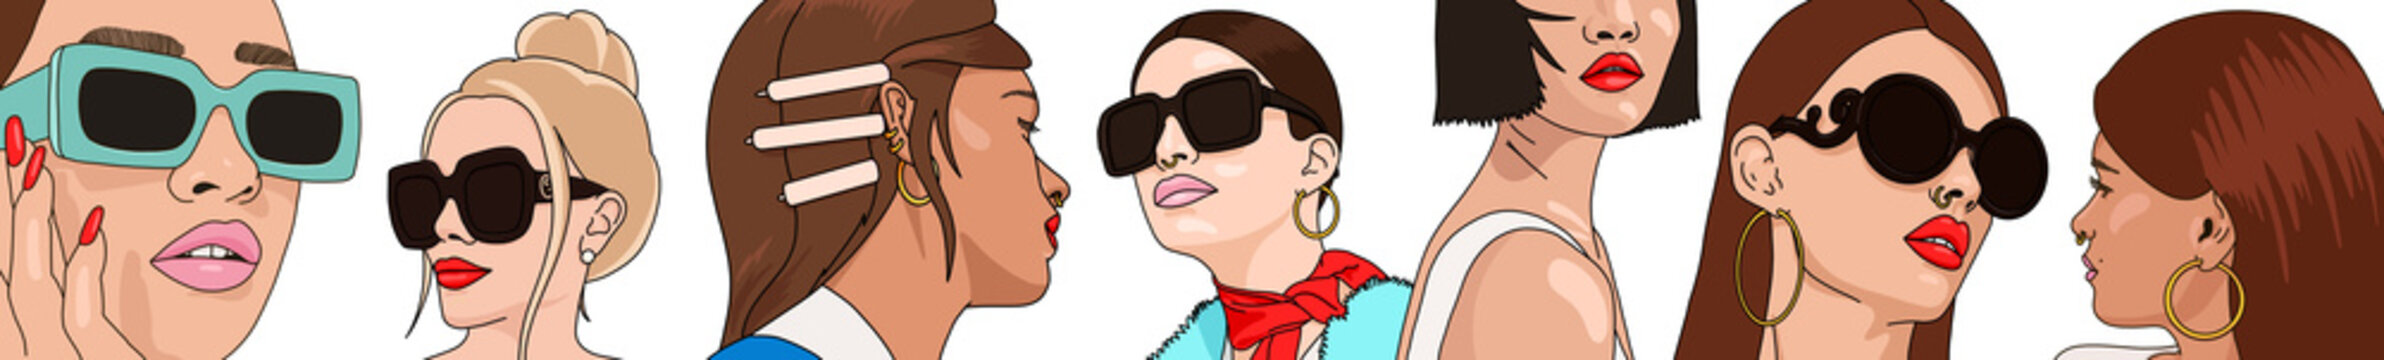 Illustration of women faces with different skin colors and hairs, wearing sunglasses and hair accessories